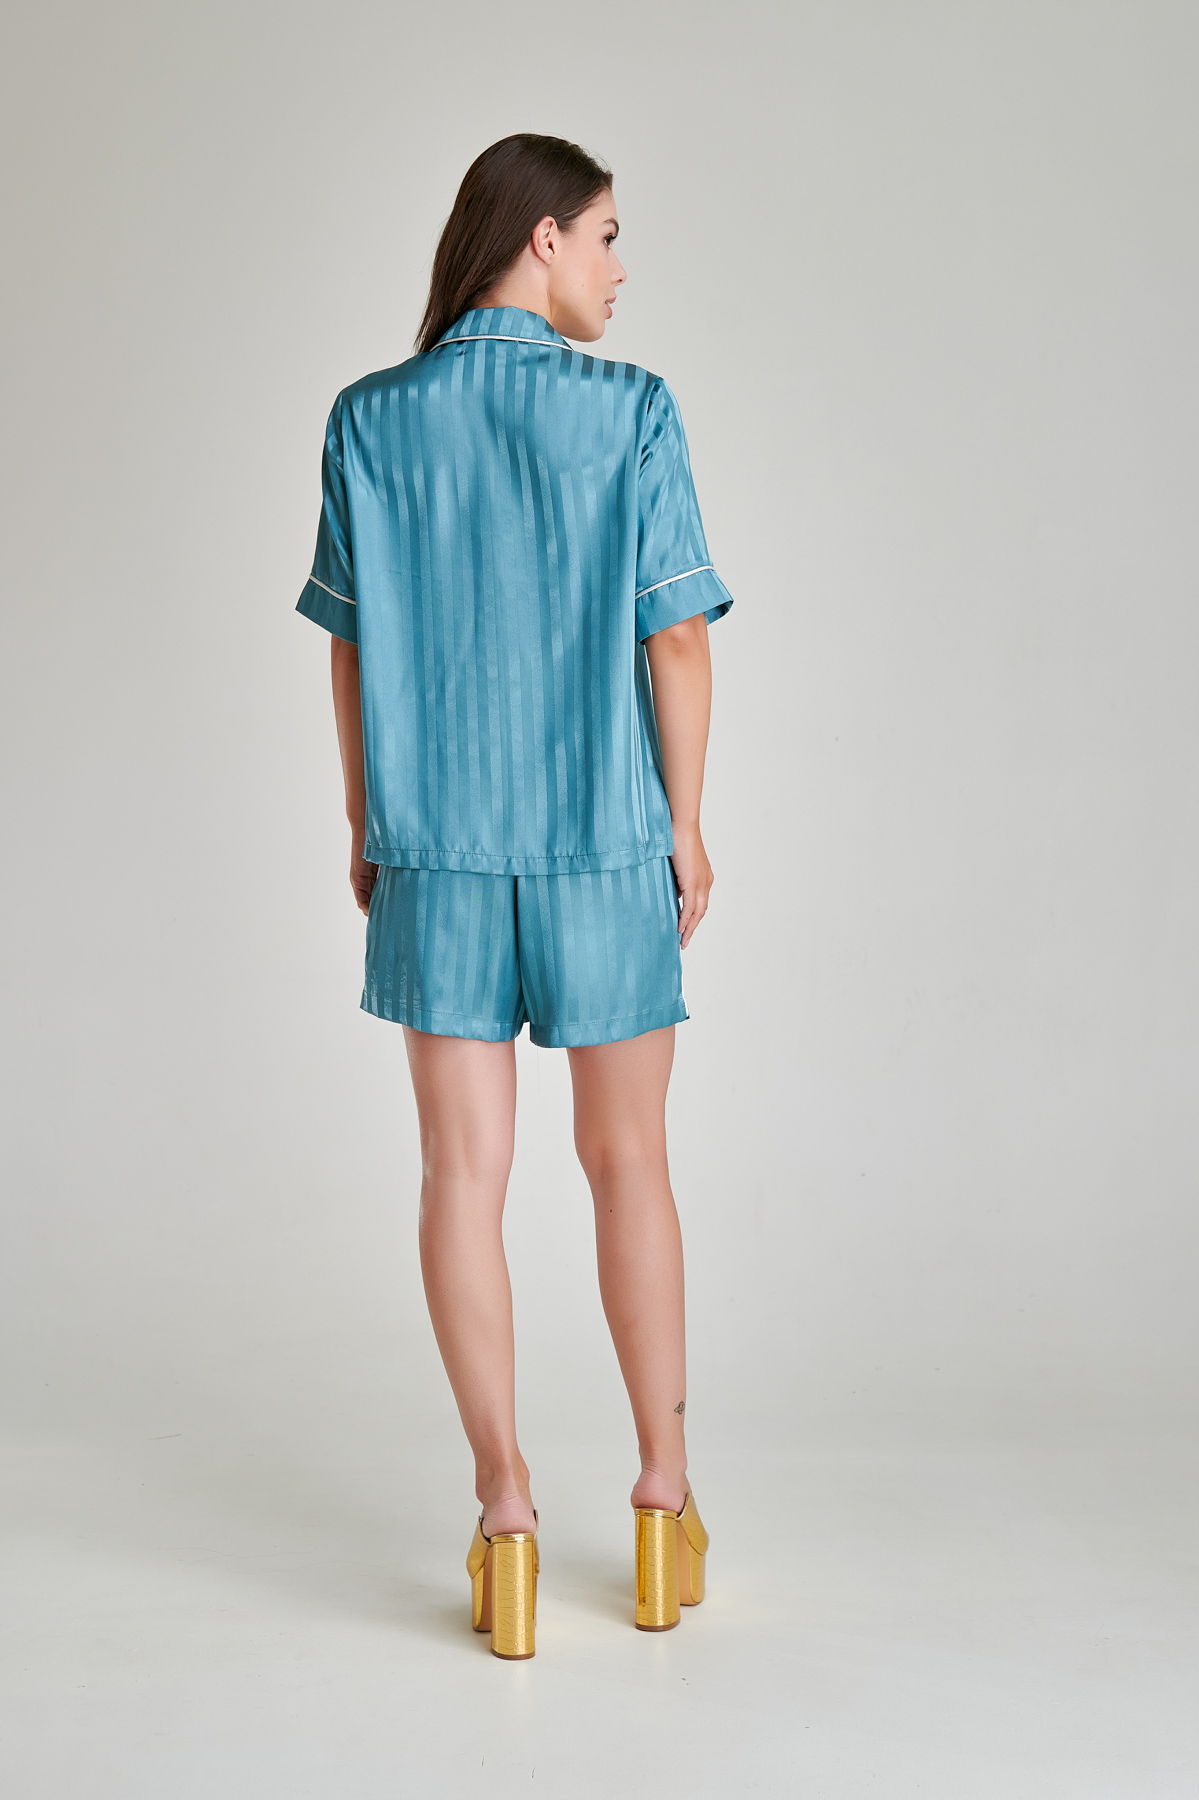 SURY home shirt with short sleeves in blue metal. Natural fabrics, original design, handmade embroidery